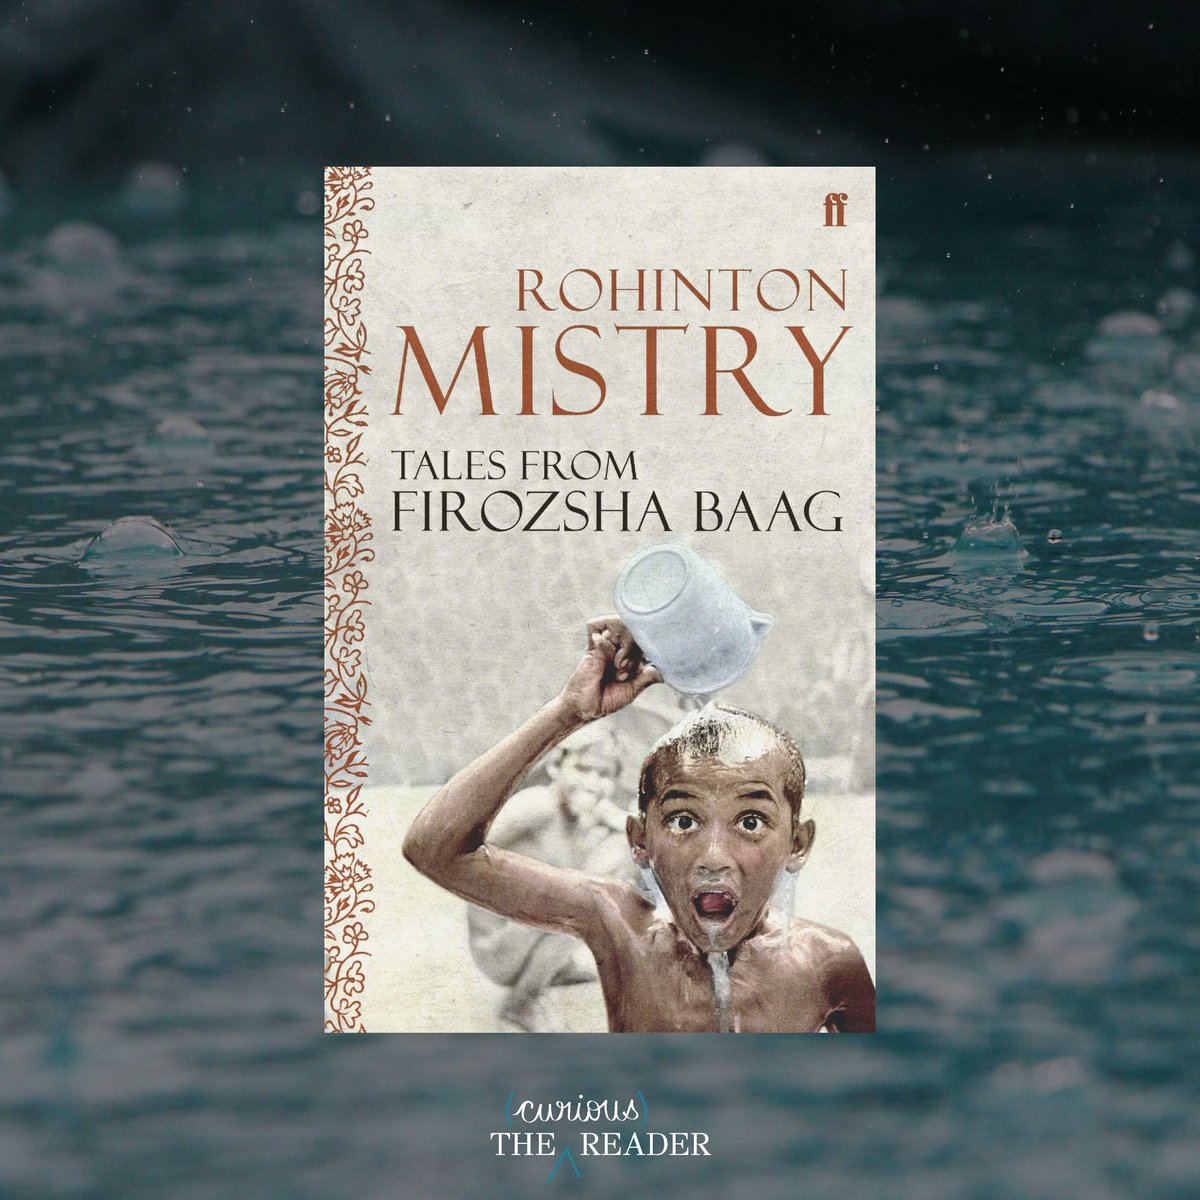 Rhea Reads: My comfort reading is Rohinton Mistry's books. Tales From Firozsha Baag humorously captures the eccentricities of the Parsi community. His beautiful melange of characters transports me to a bygone era of Bombay. The short tales are perfect for a cosy read.